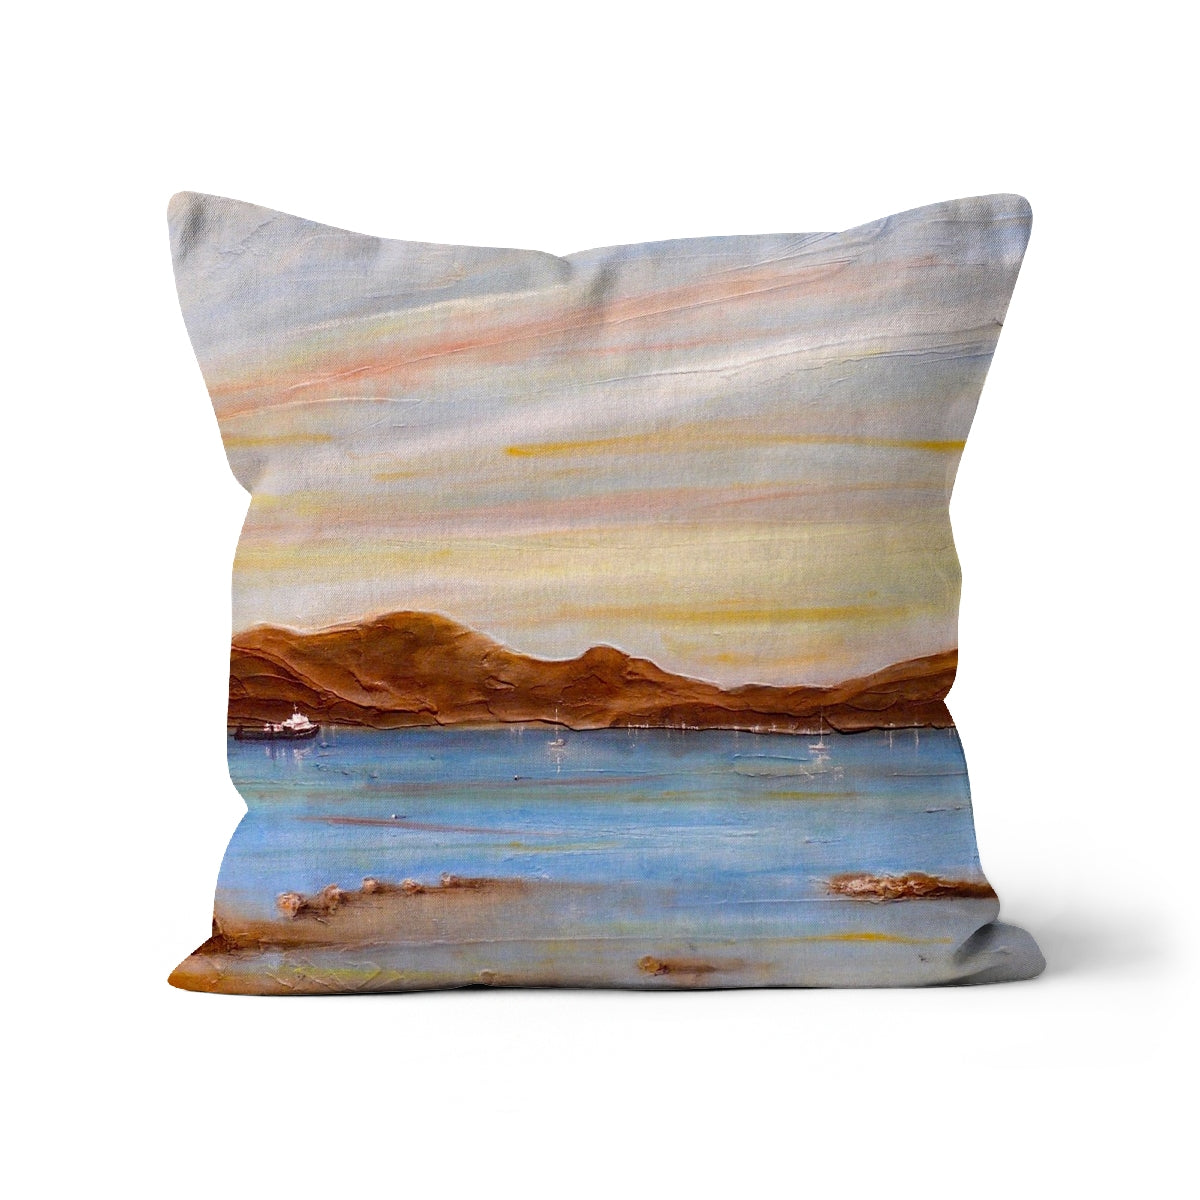 The Last Ferry To Dunoon Art Gifts Cushion-Cushions-River Clyde Art Gallery-Canvas-12"x12"-Paintings, Prints, Homeware, Art Gifts From Scotland By Scottish Artist Kevin Hunter